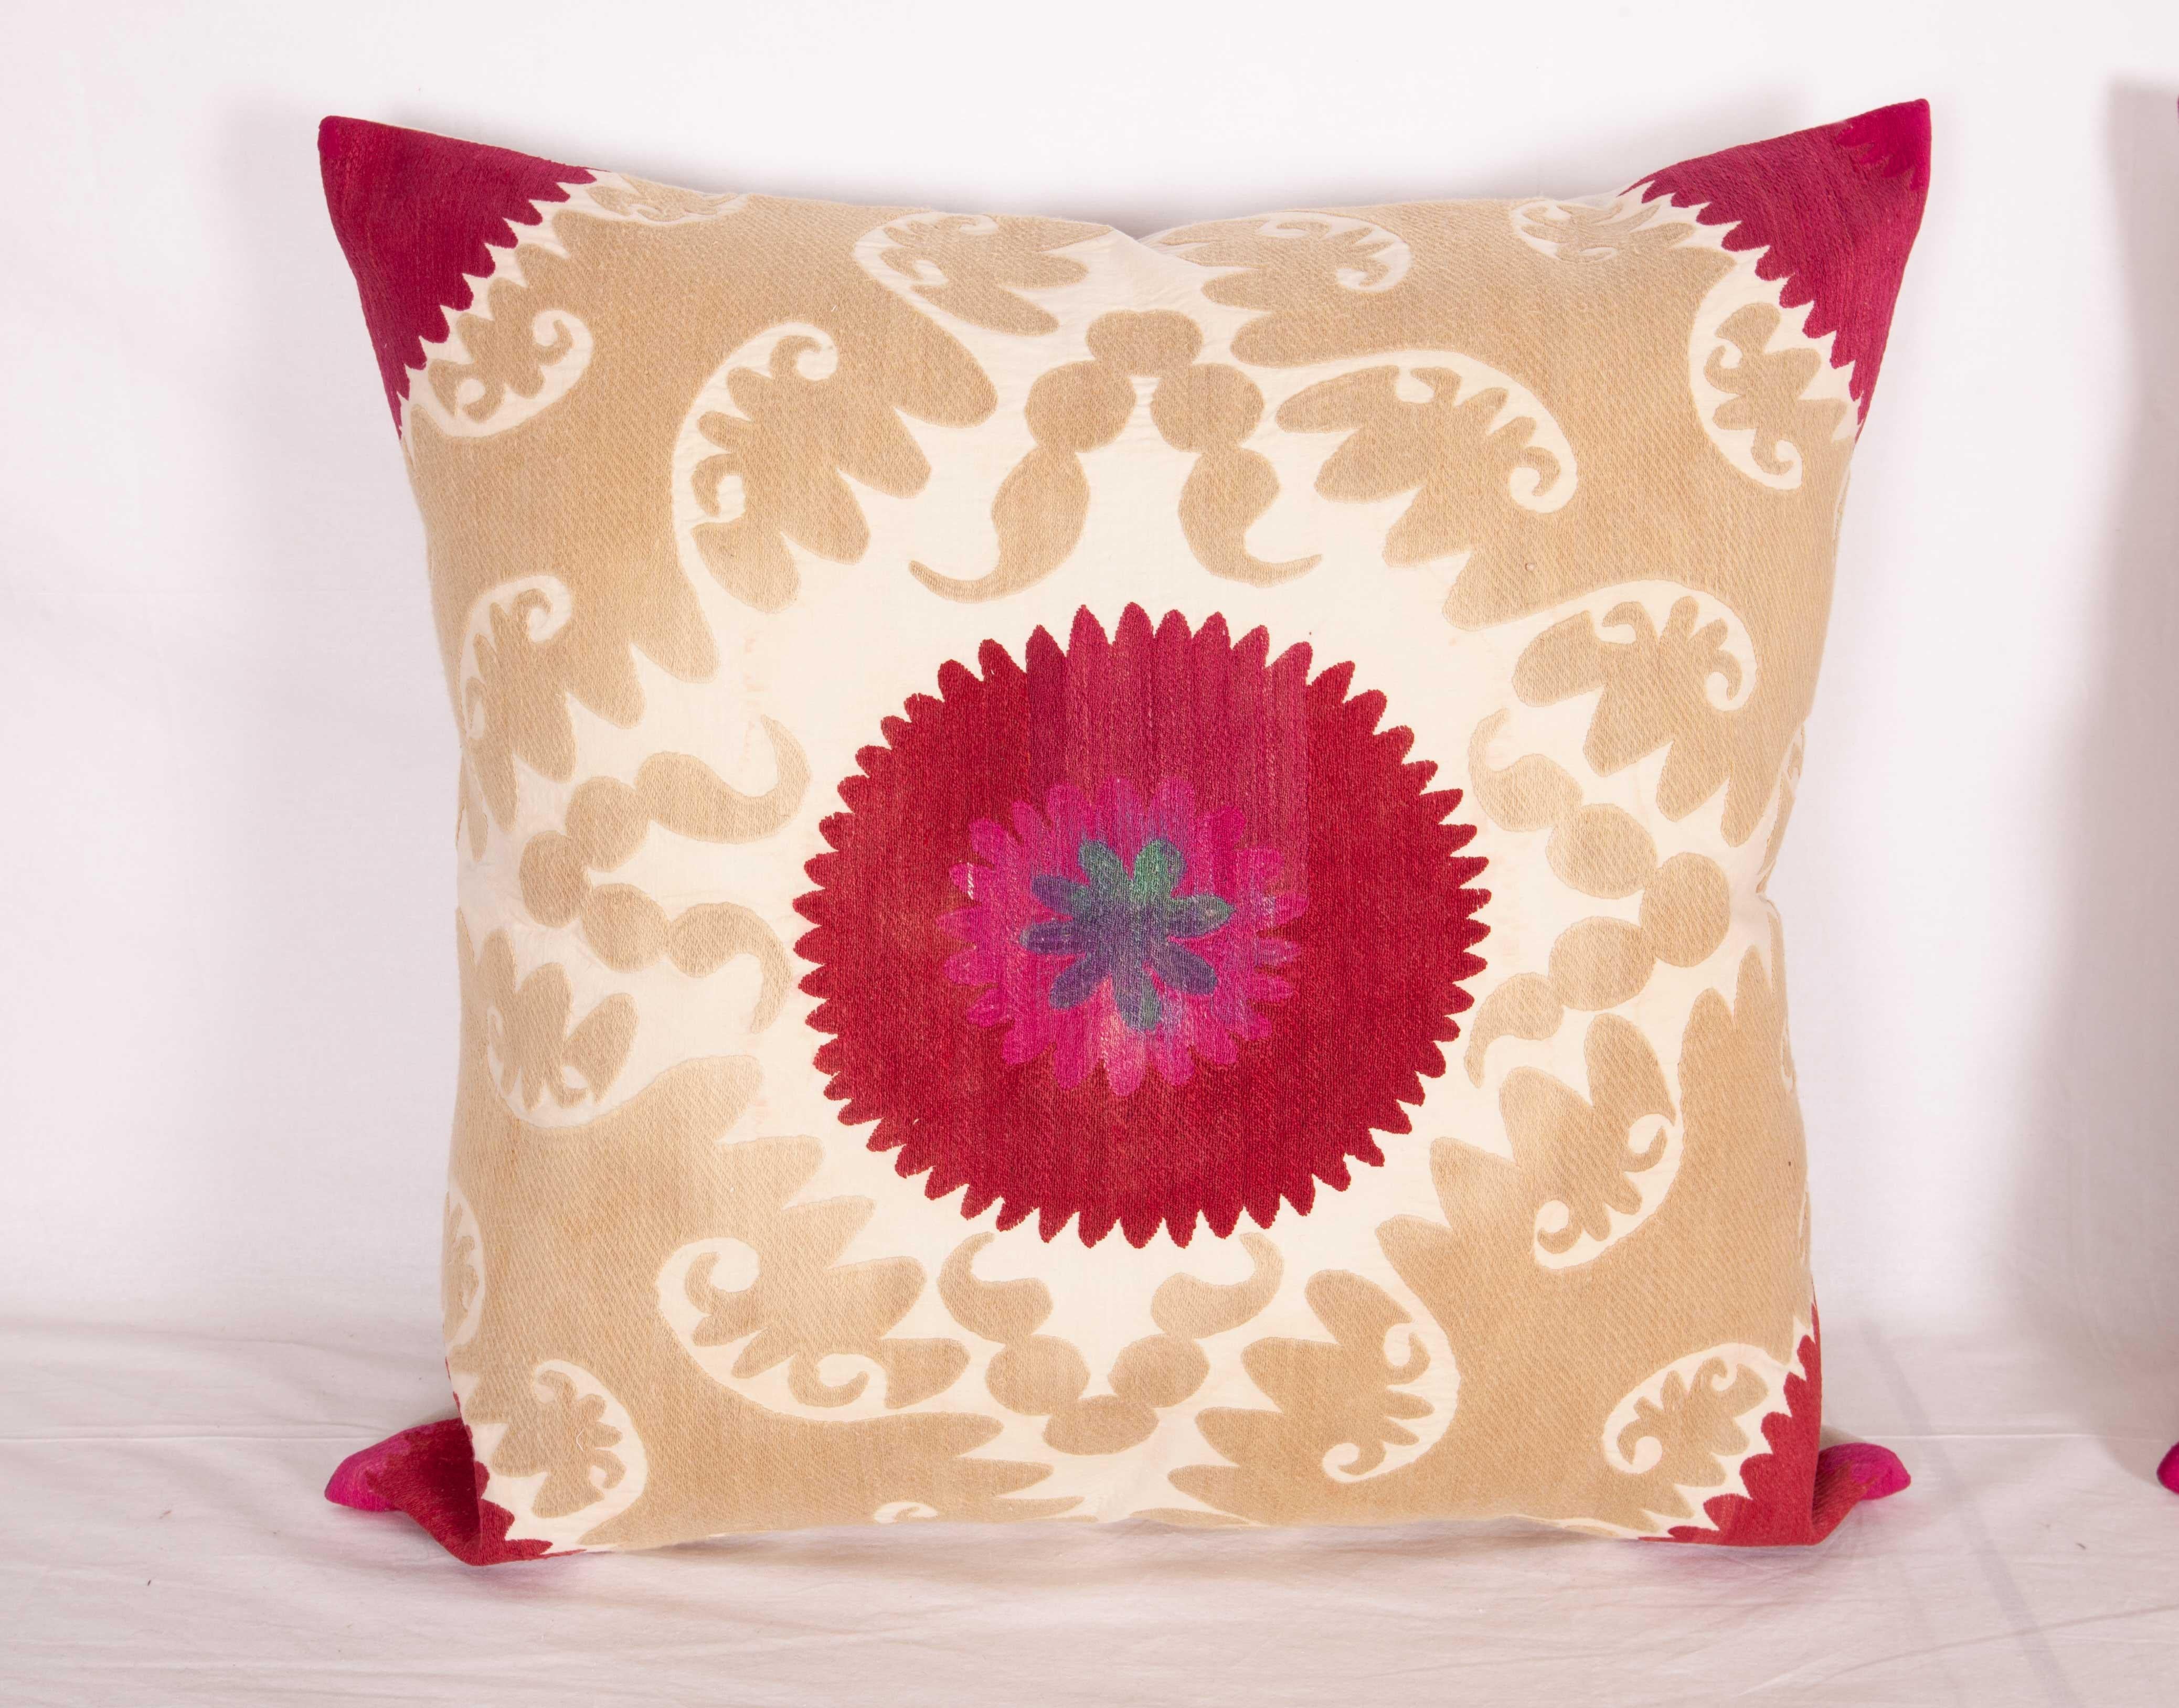 Embroidered Suzani Pillow Cases /Cushion Covers Made from a Mid-20th Century Uzbek Suzani